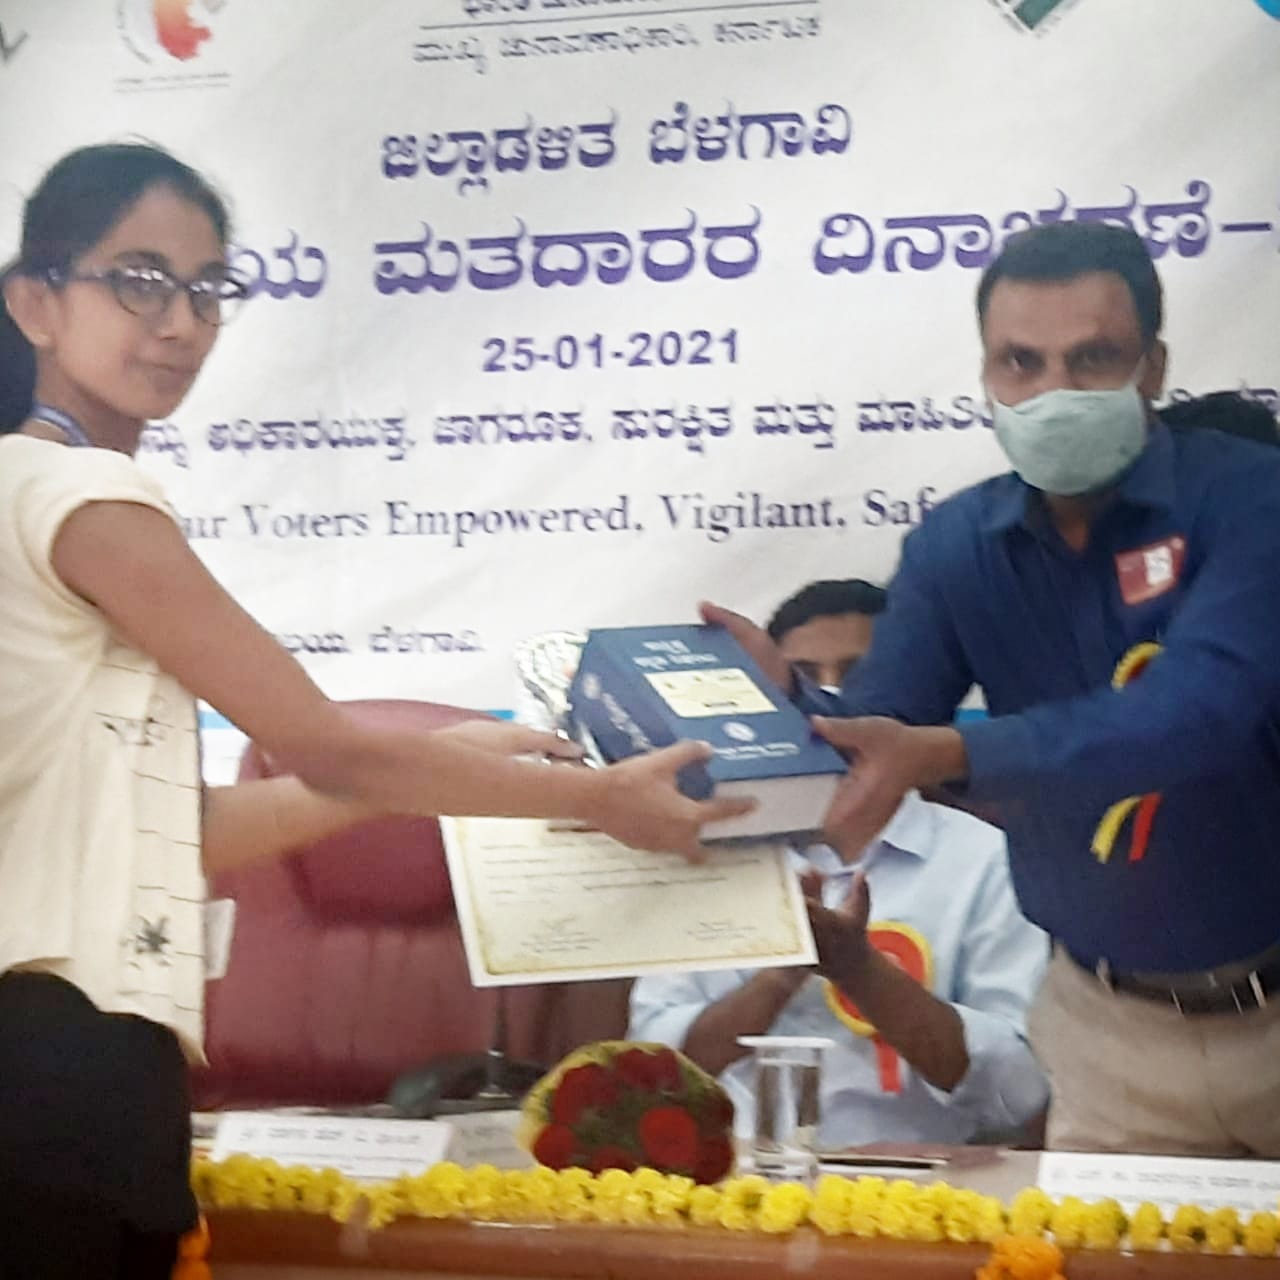 Ms. Rashmi Kamat, bagged 1st prize in district level English Essay competition.